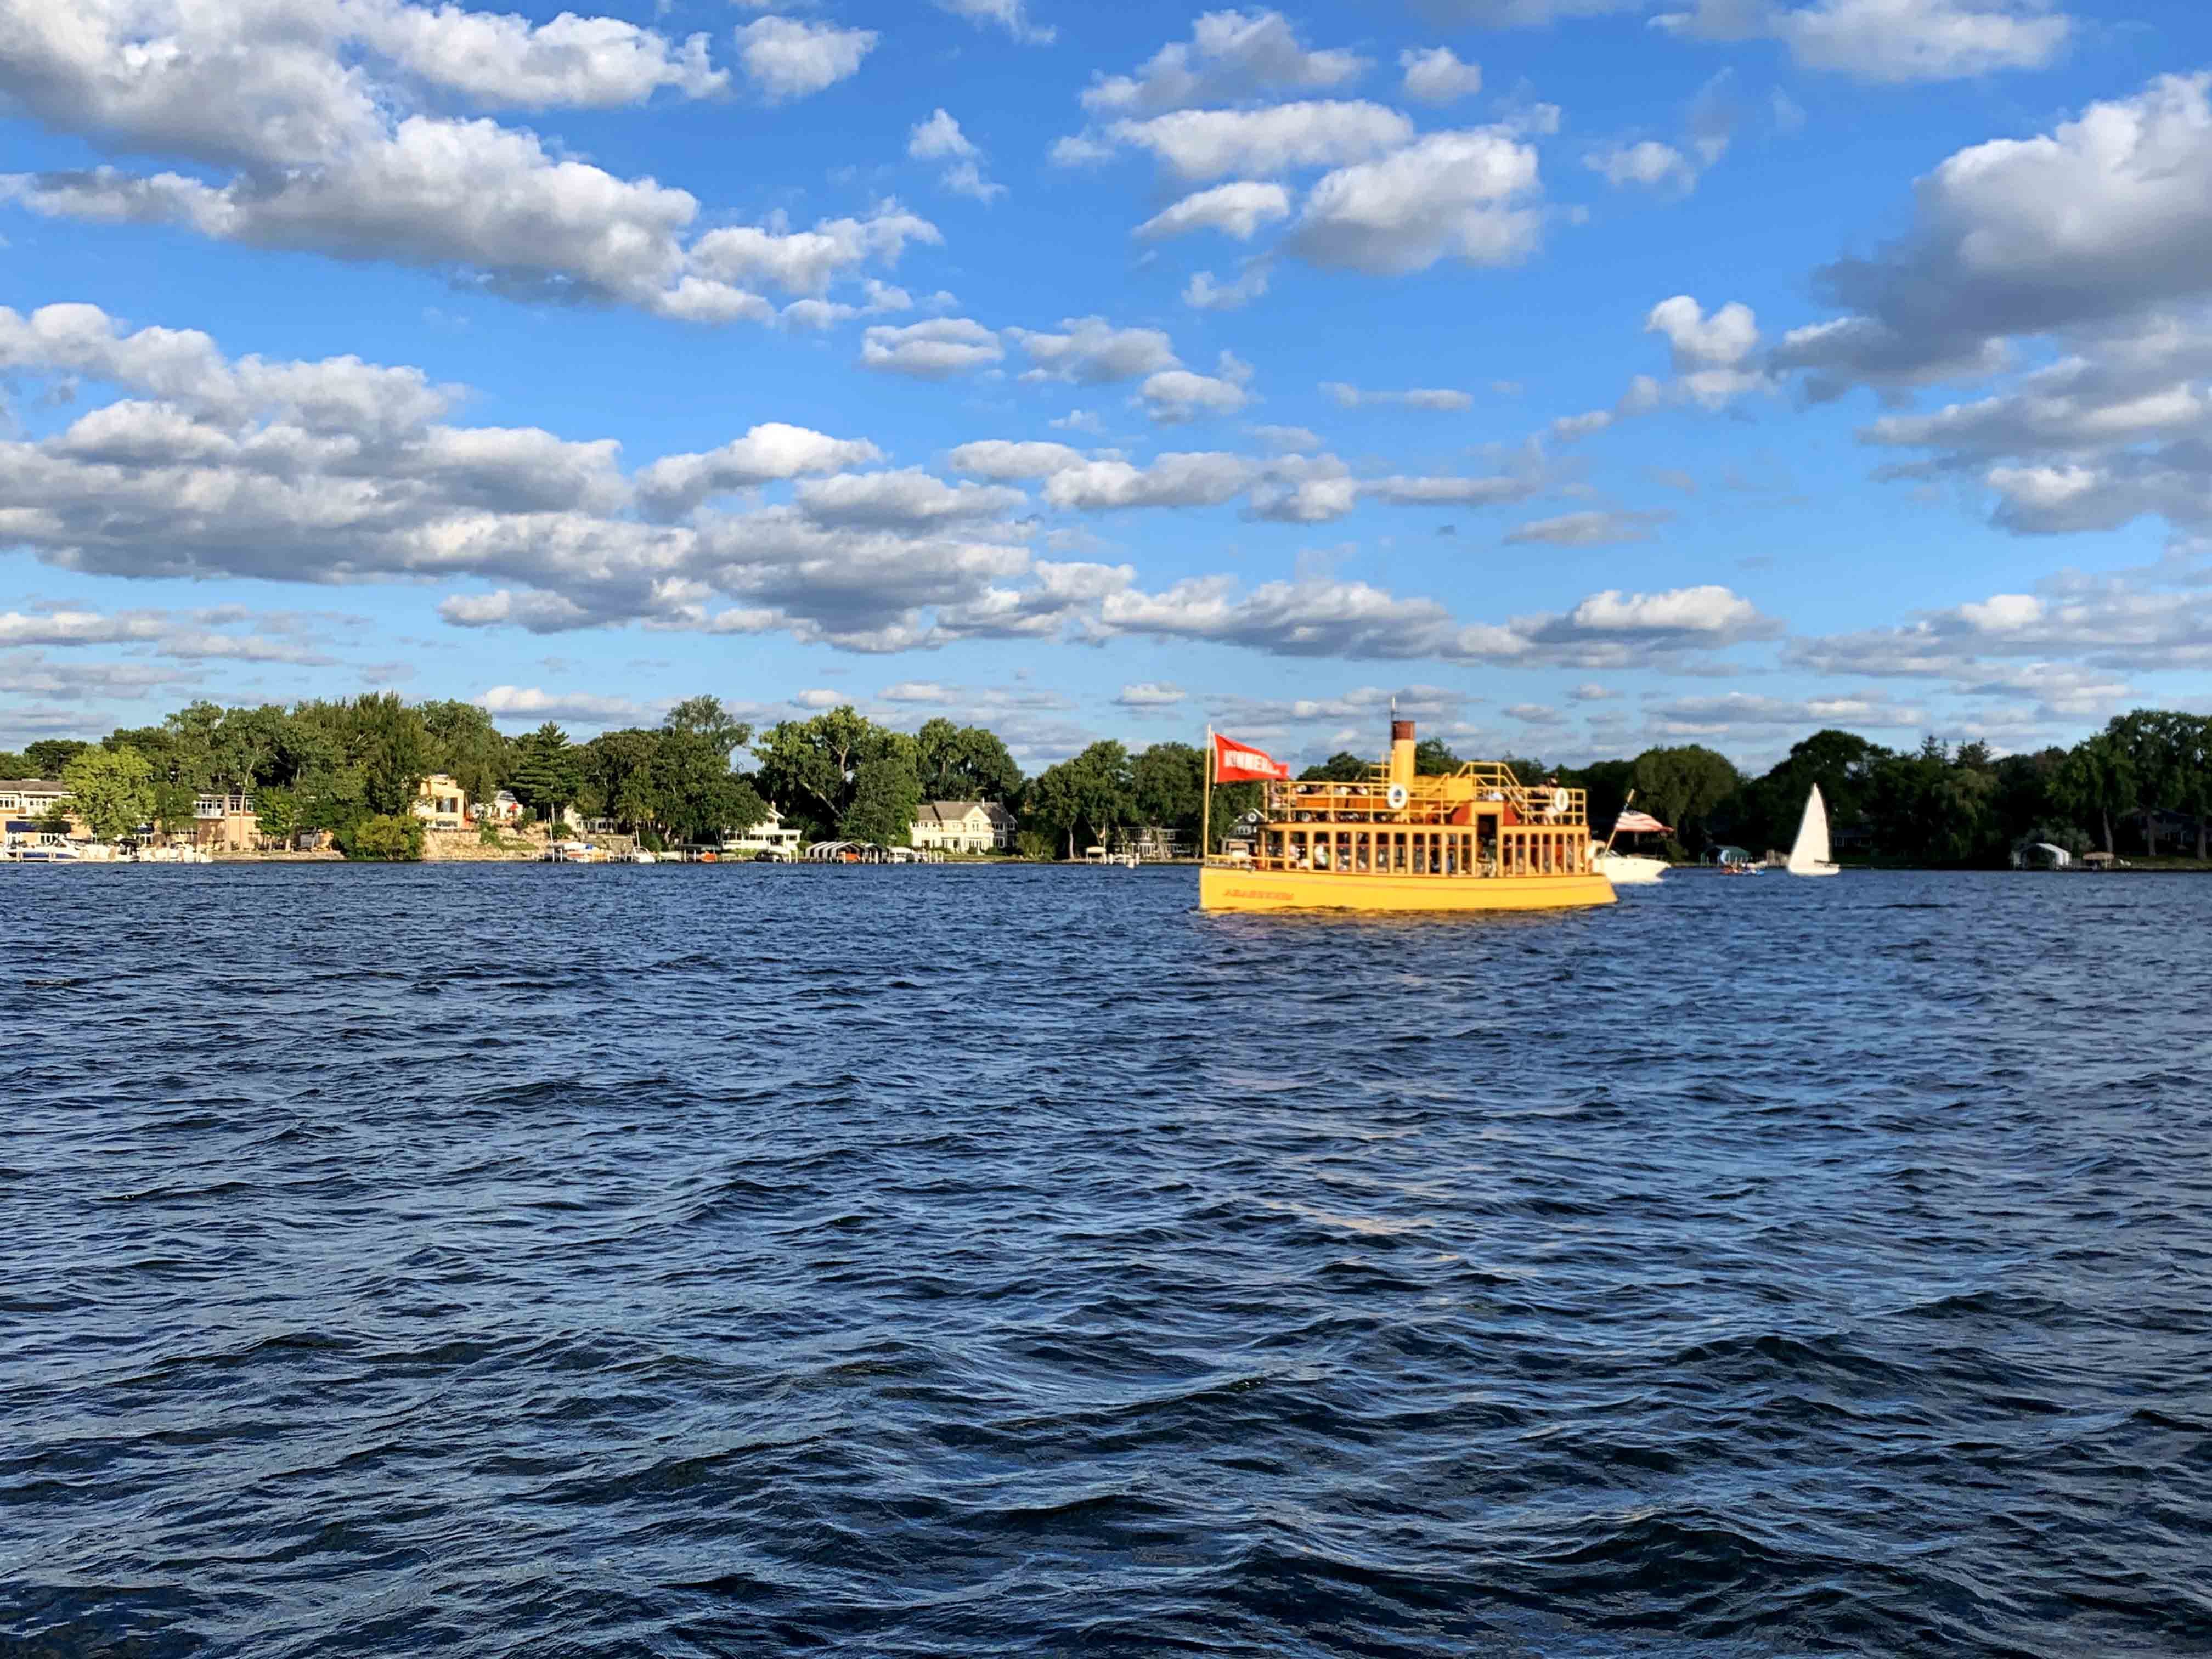 Lake Minnetonka, the largest lake in Hennepin County, offers amazing luxury homes for sale on the shores of the lake. Image of Minnehaha Steamboat on Lake Minnetonka.